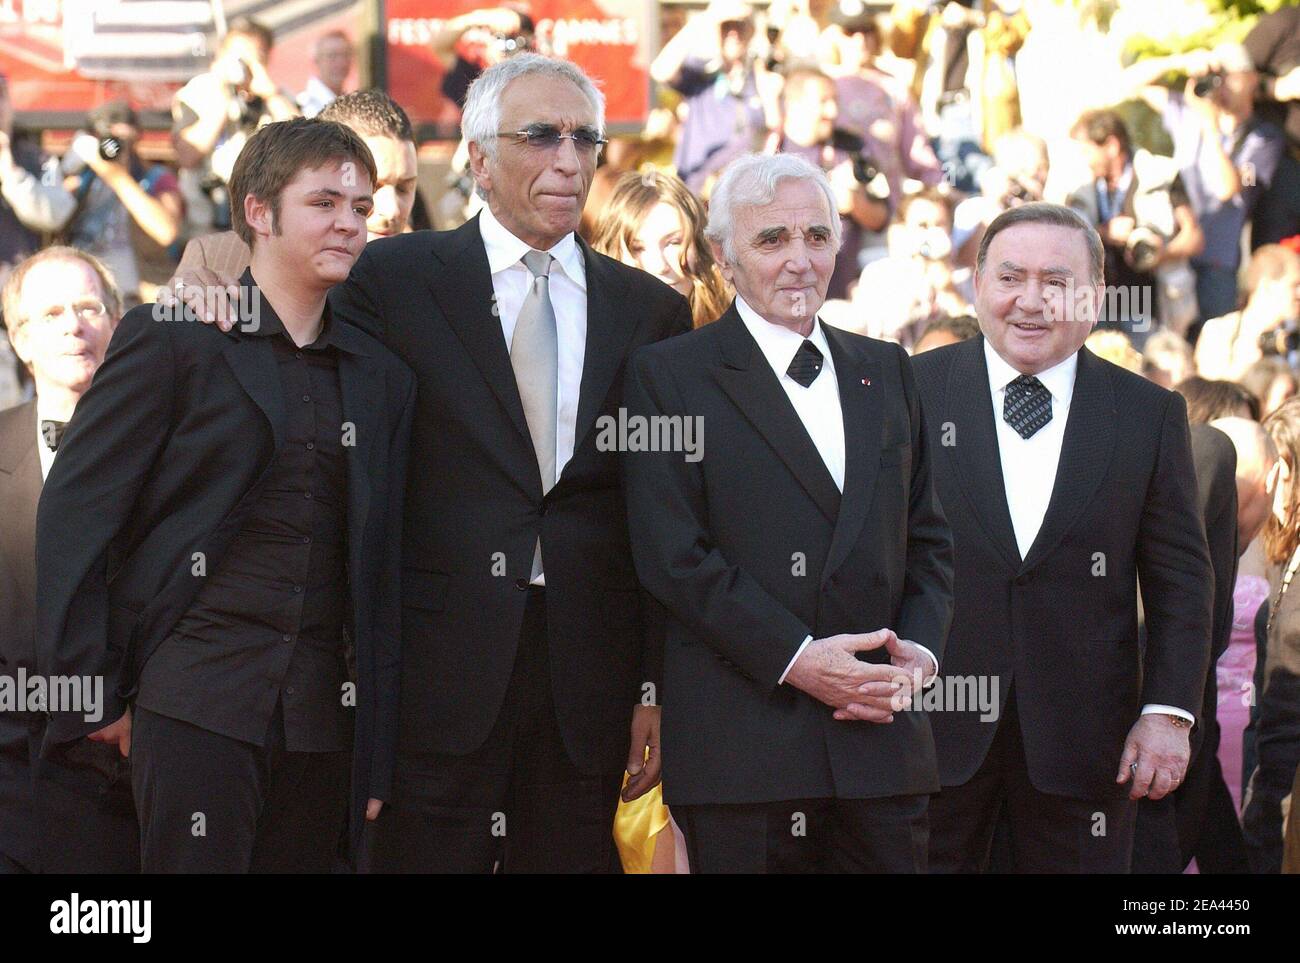 (L-R) Damien Jouillerot, Gerard Darmon, Charles Aznavour and Levon Sayan arrive for the screening of the film 'Peindre ou faire l'amour' directed by Arnaud and Jean-Marie Larrieu during the 58th International Film Festival, in Cannes, southern France, on May 18, 2005. Photo by Hahn-Nebinger-Klein/ABACA. Stock Photo